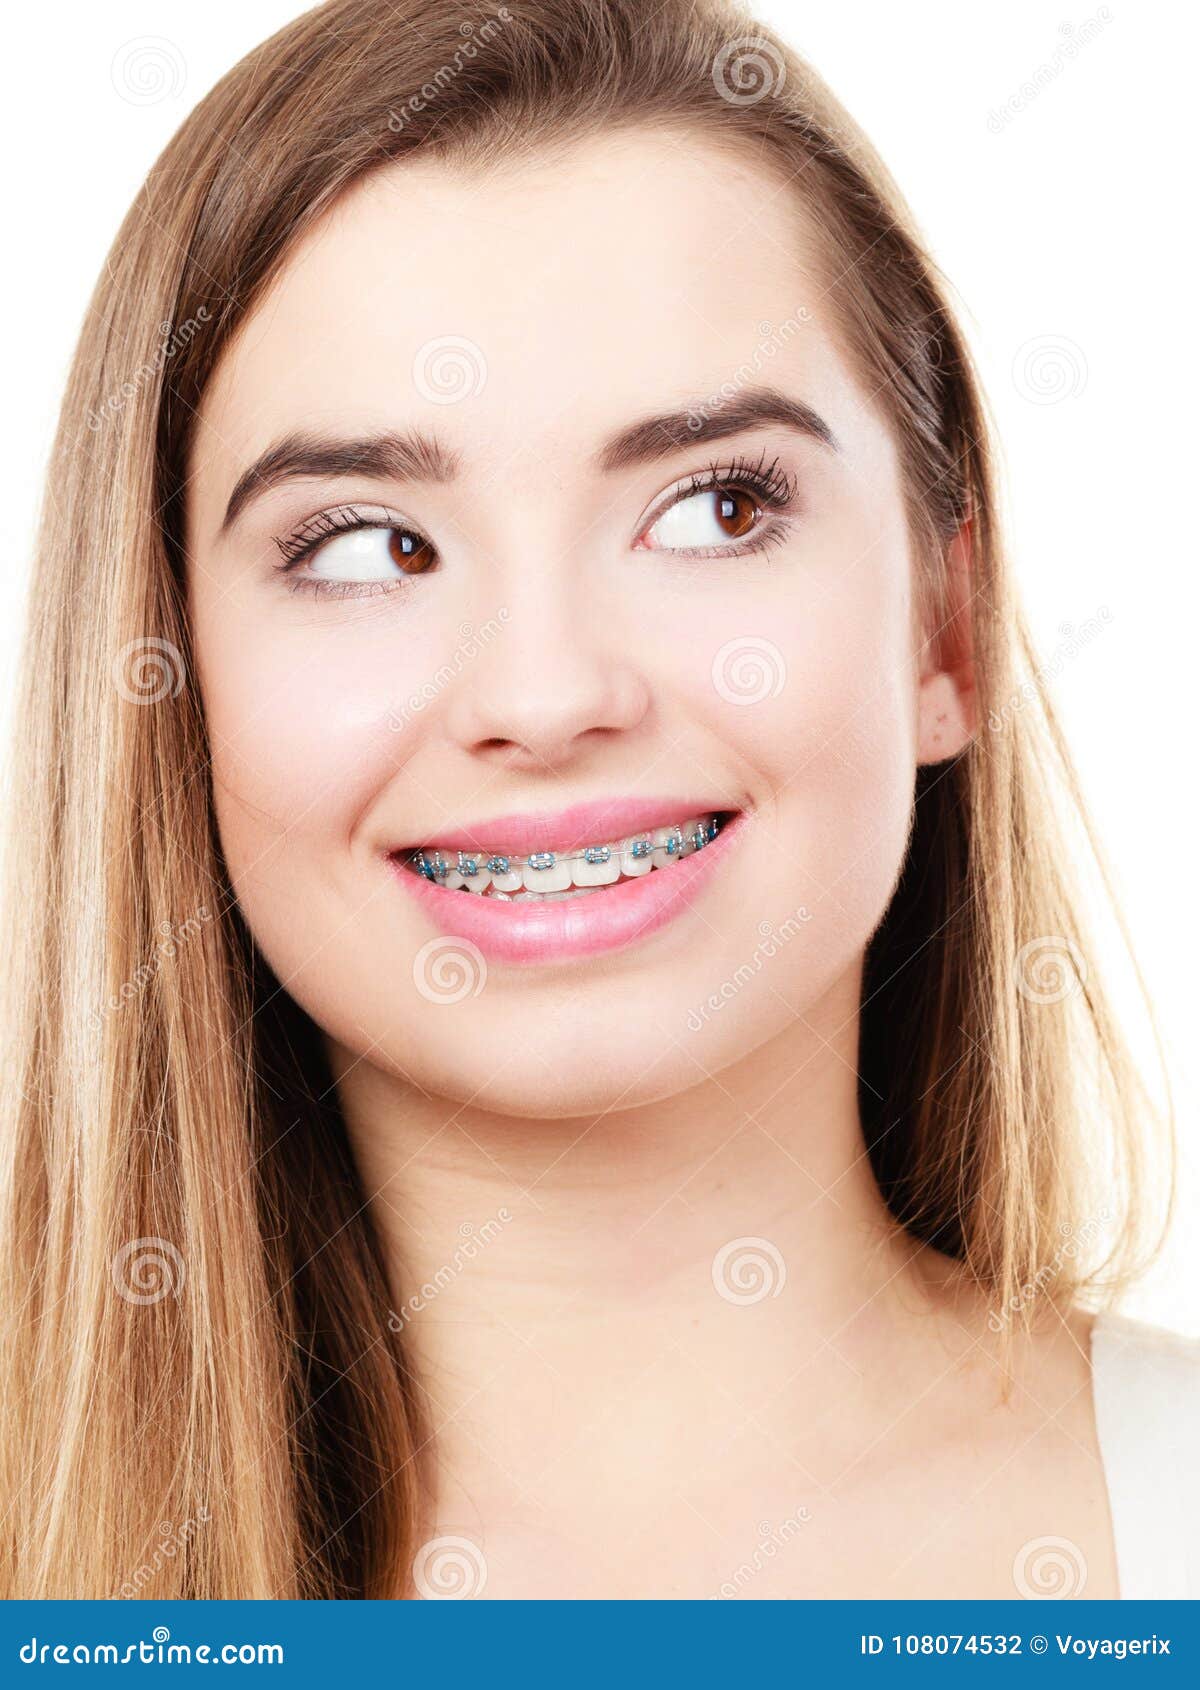 Woman Showing Her Teeth with Braces Stock Photo - Image of showing ...